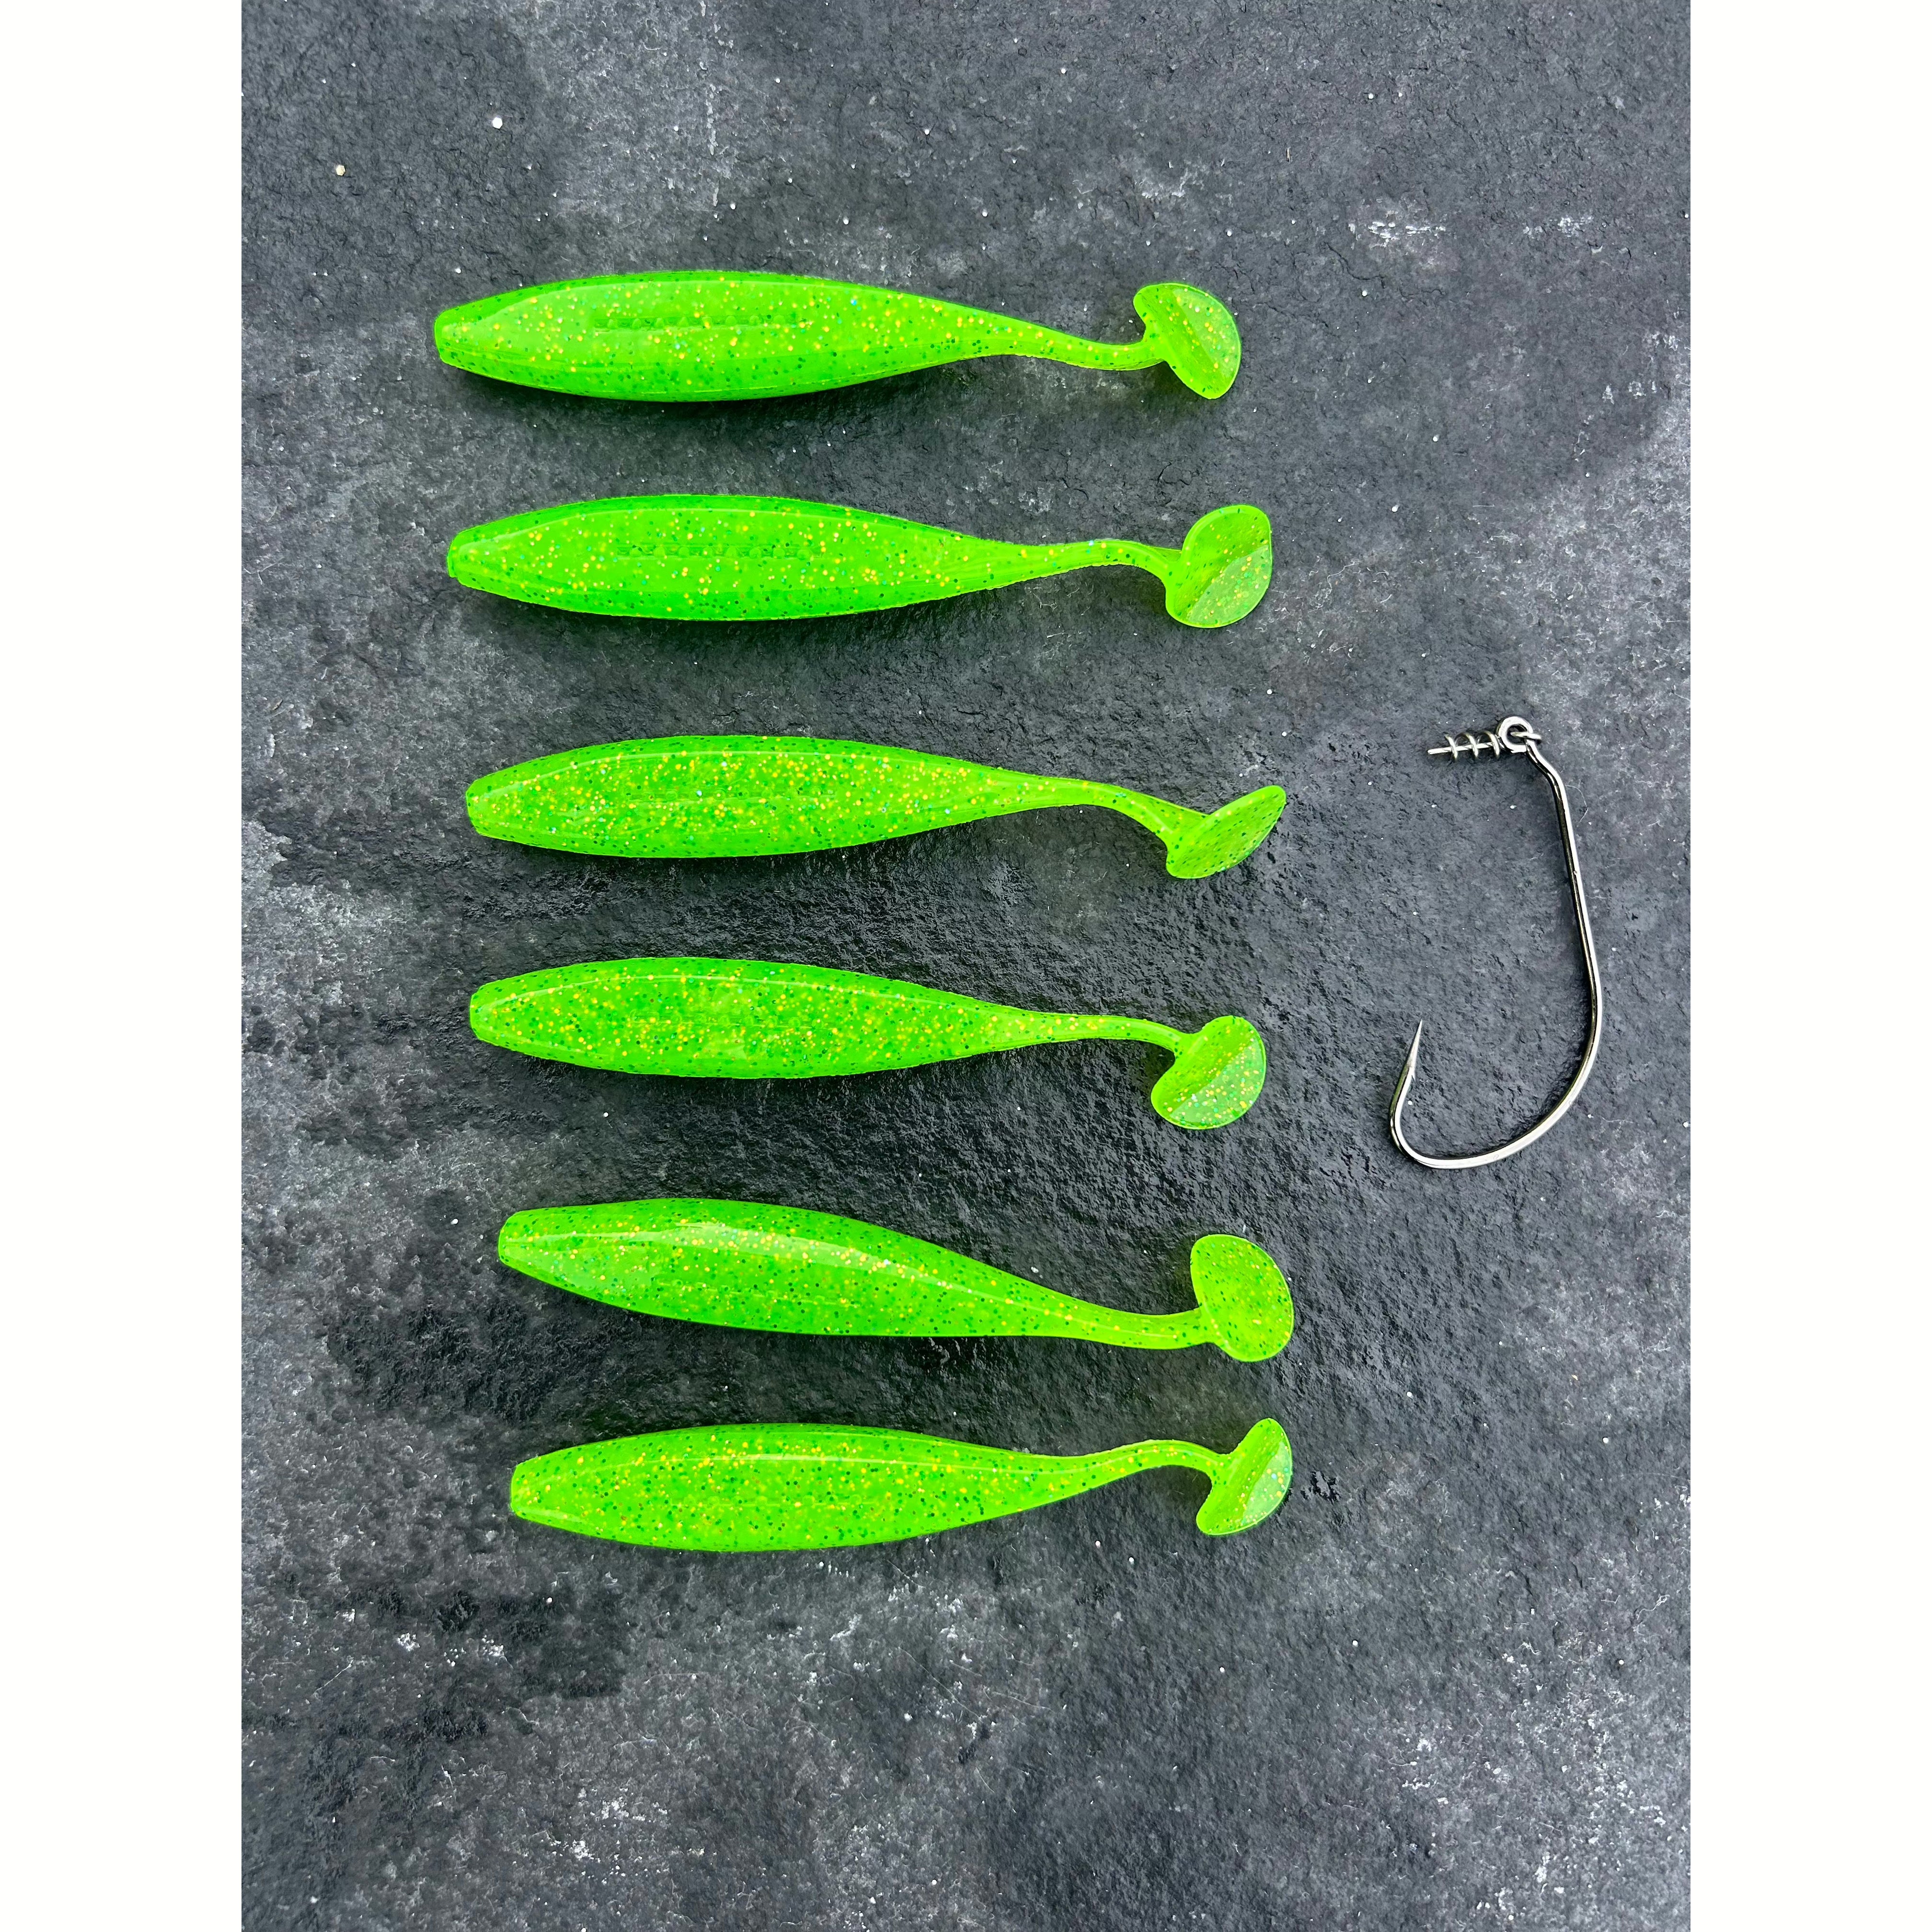 Small Weedless Shads 90mm 8g